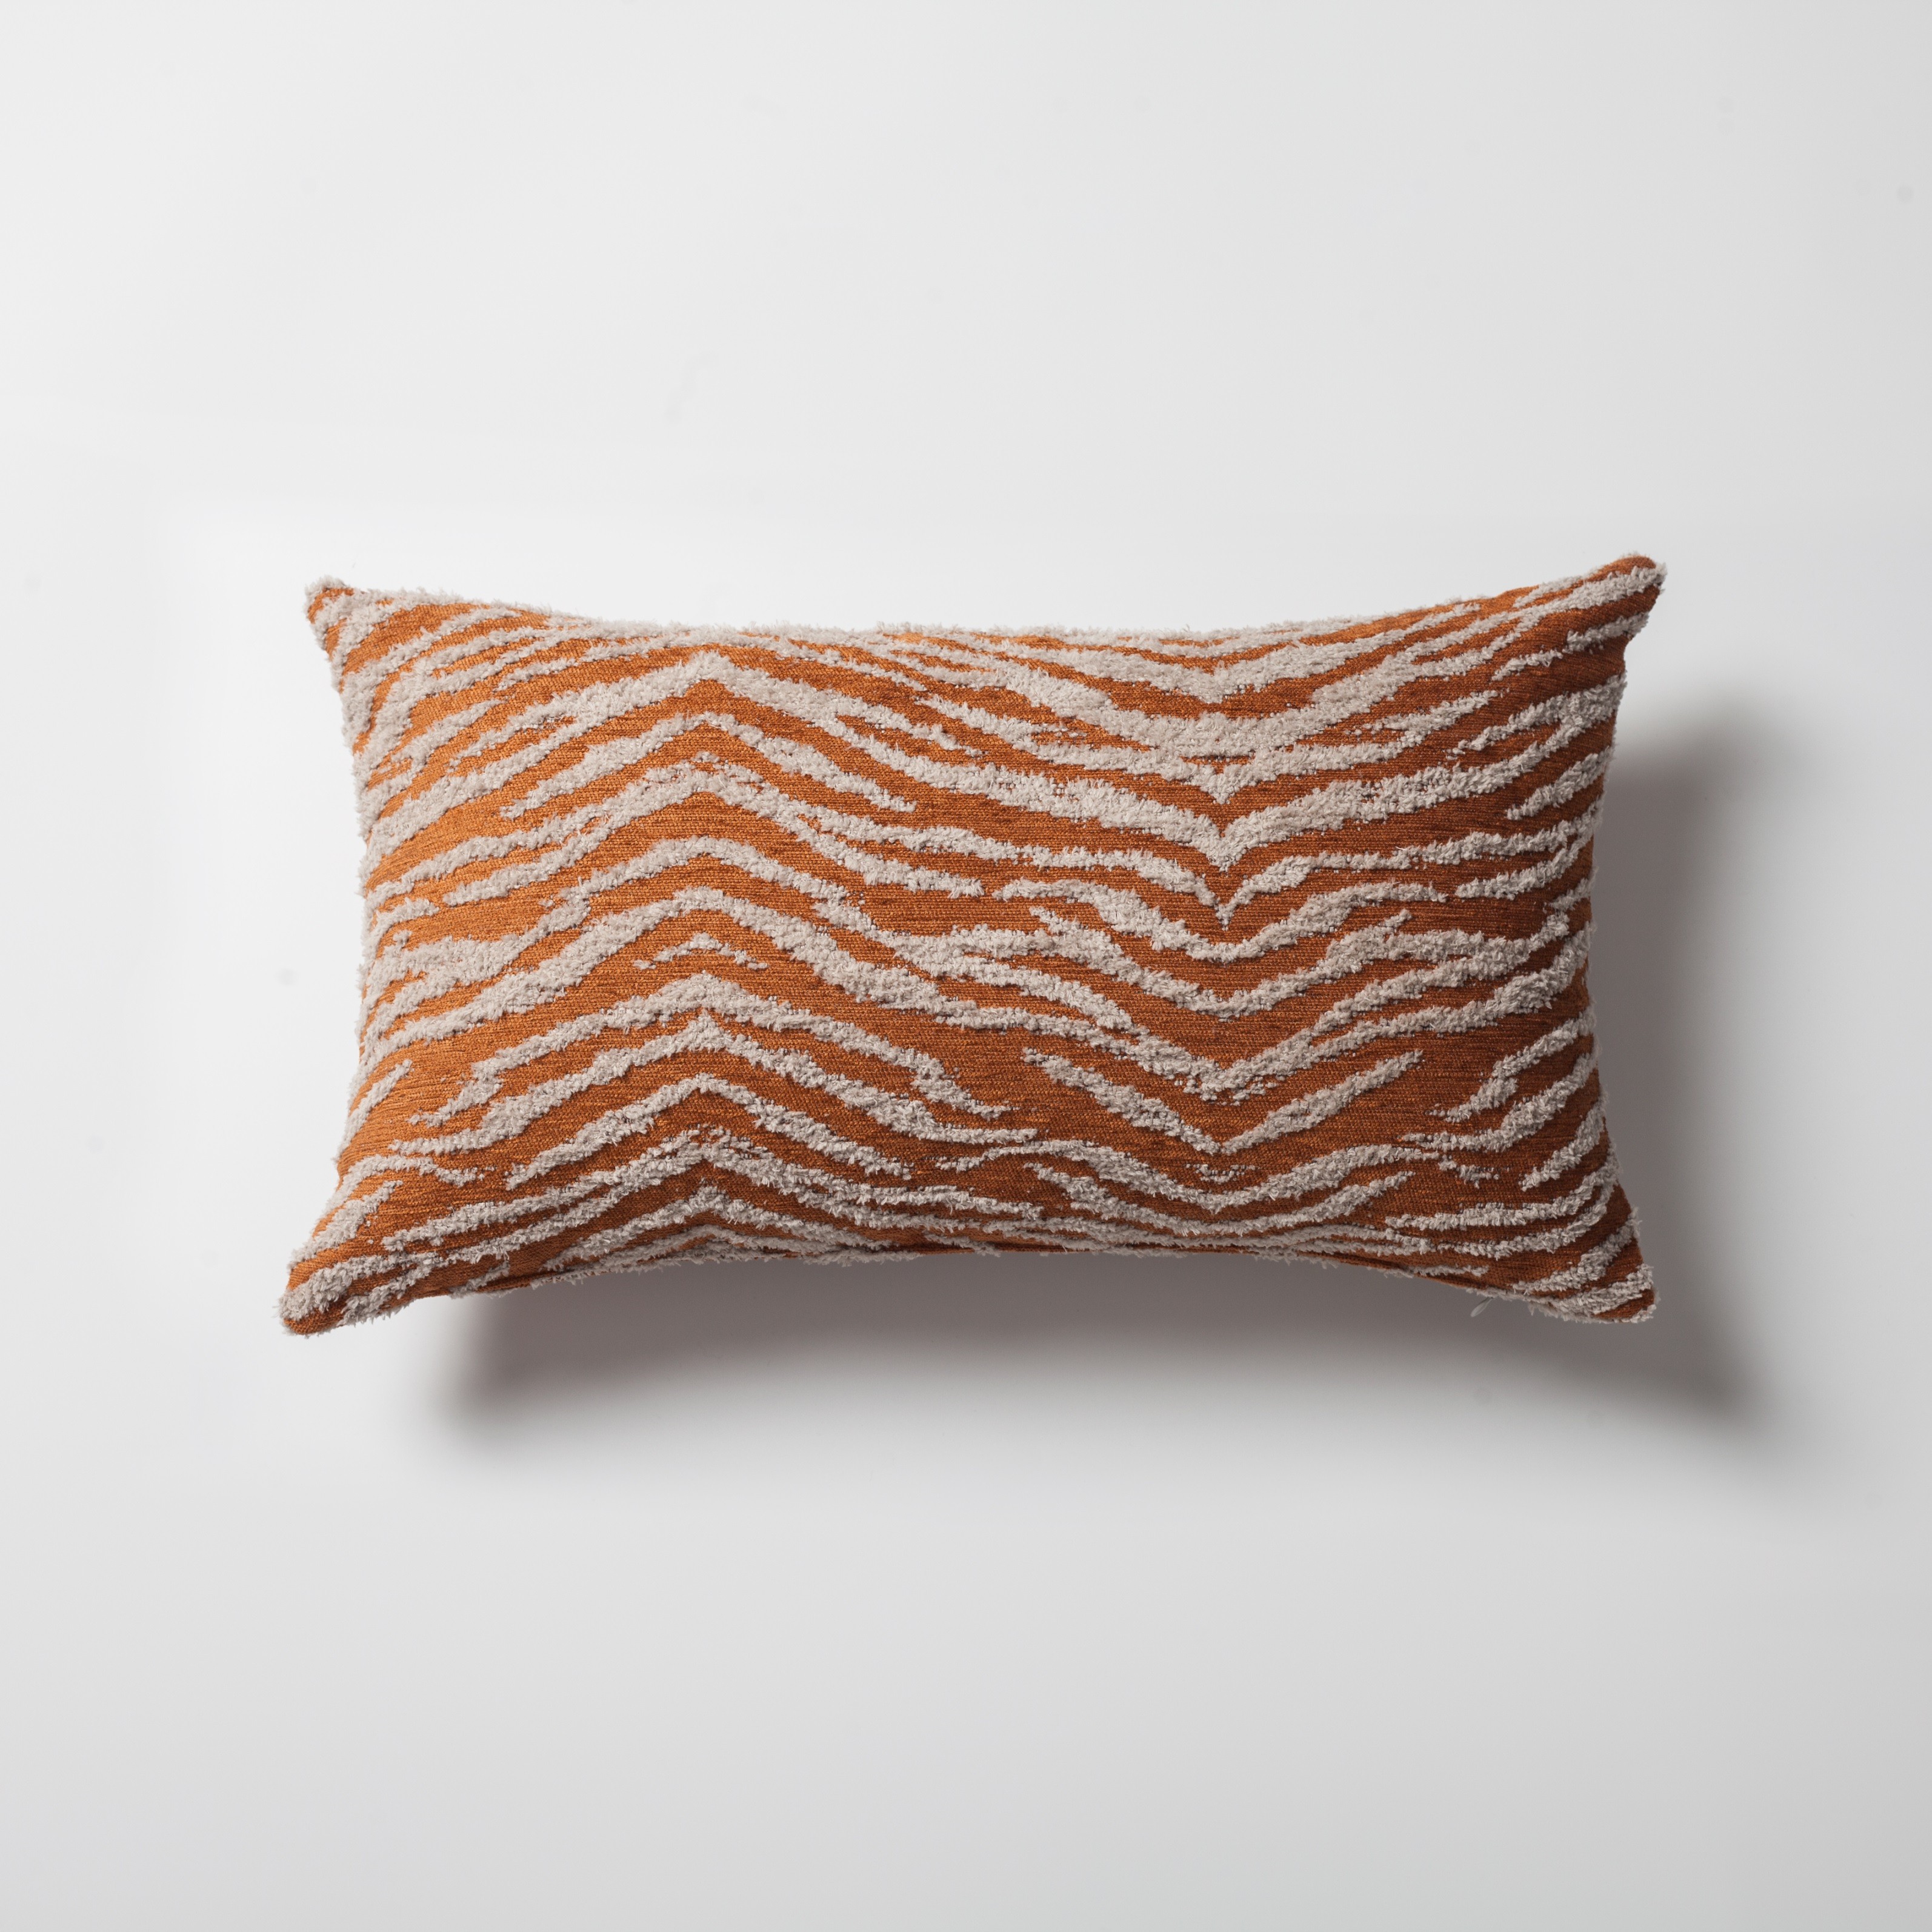 "Tokyo" - Geometric Zebra Patterned Pillow 12x20 Inch - Orange (Cover Only)